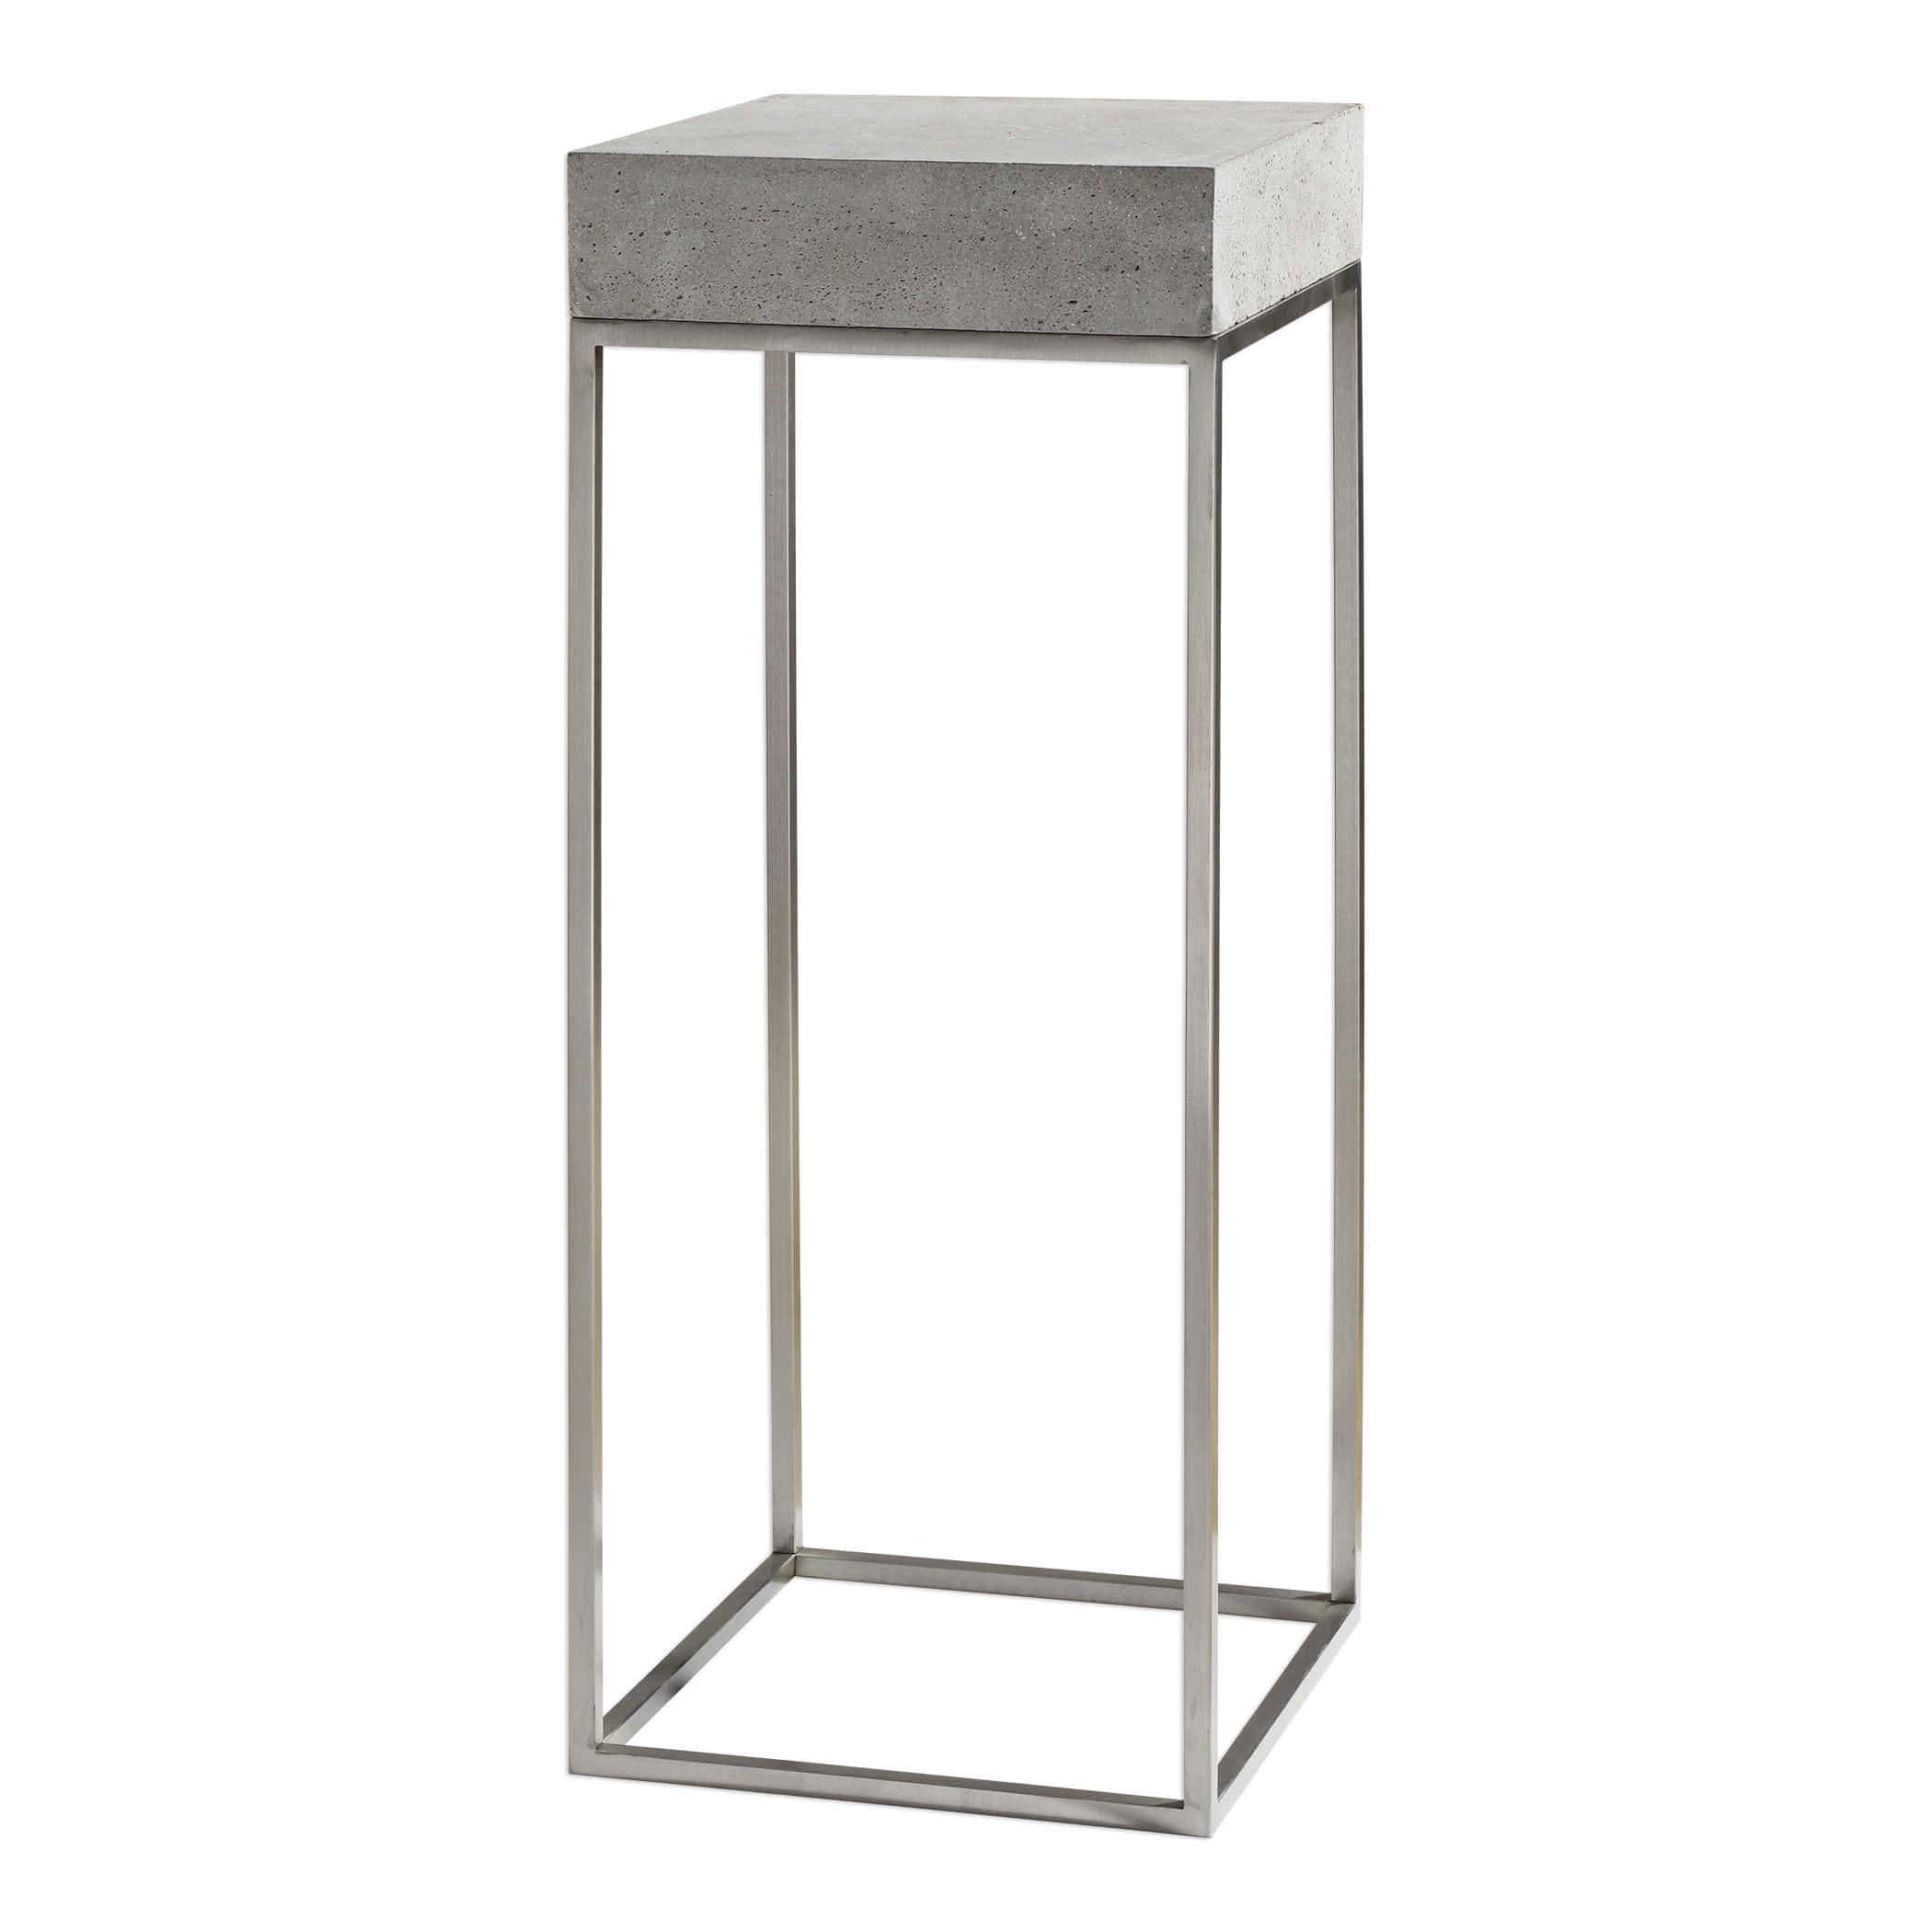 Jude Plant Stand Table Uttermost